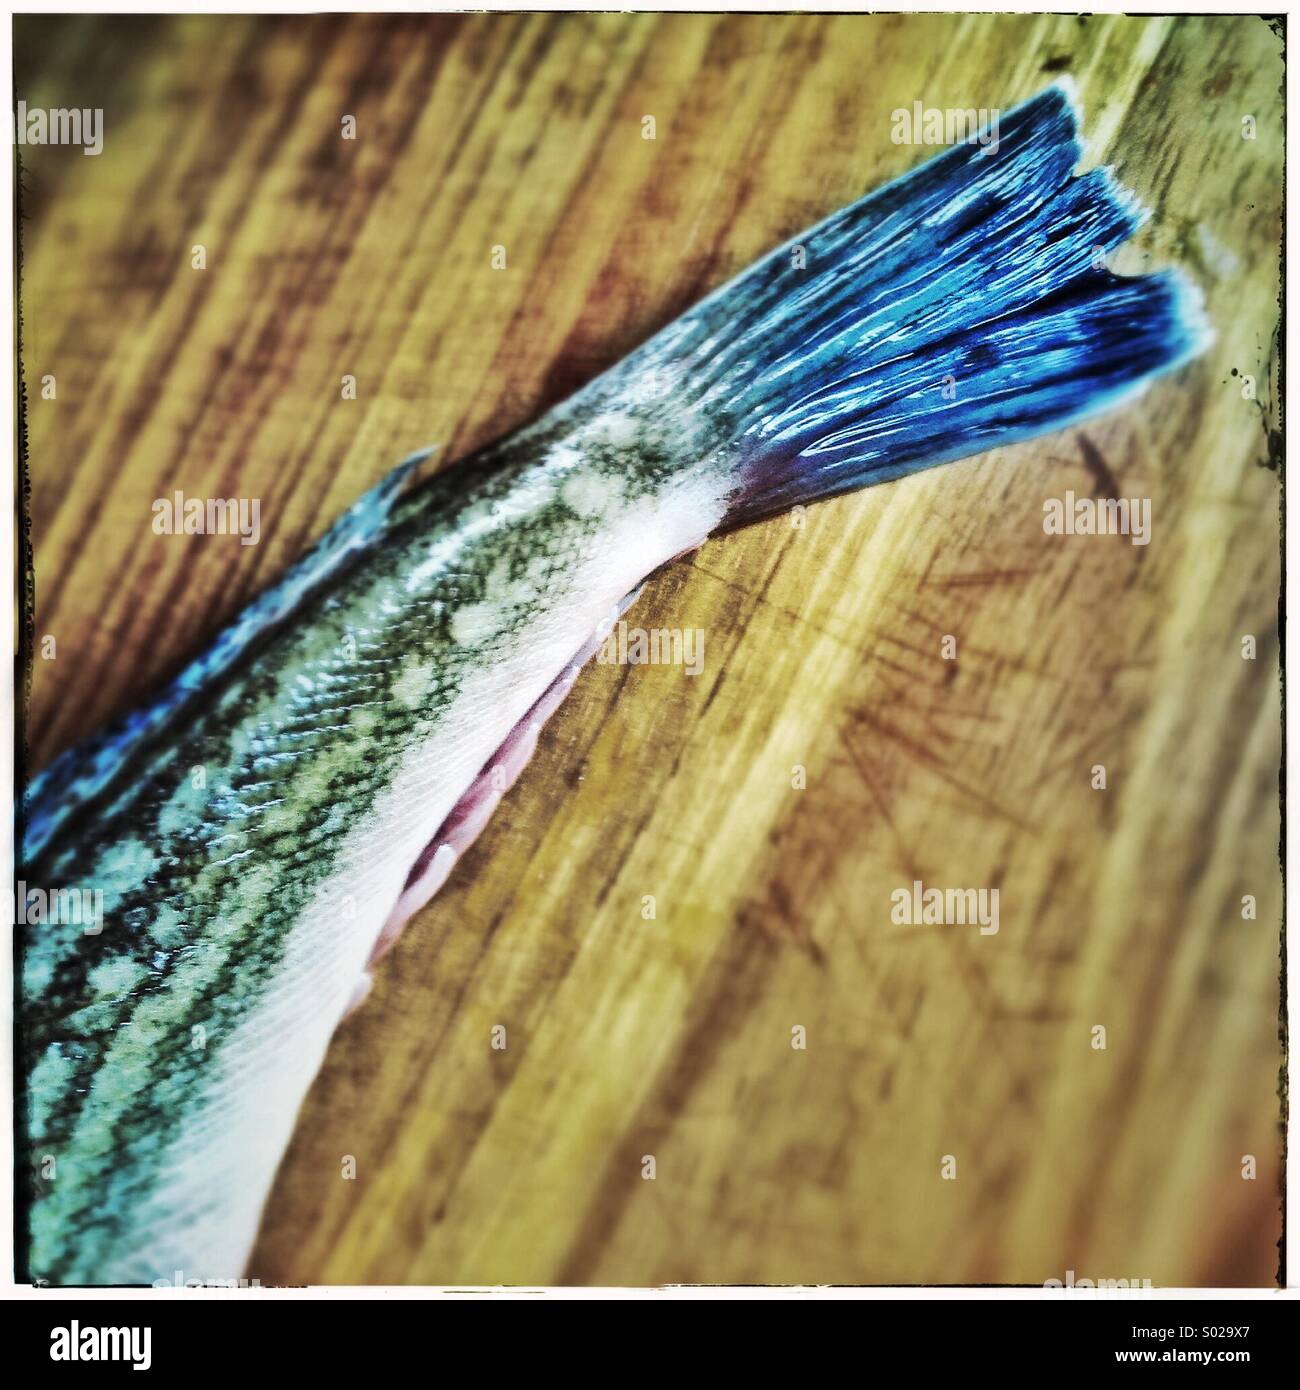 Fish tail on a wooden board ready to be grilled Stock Photo